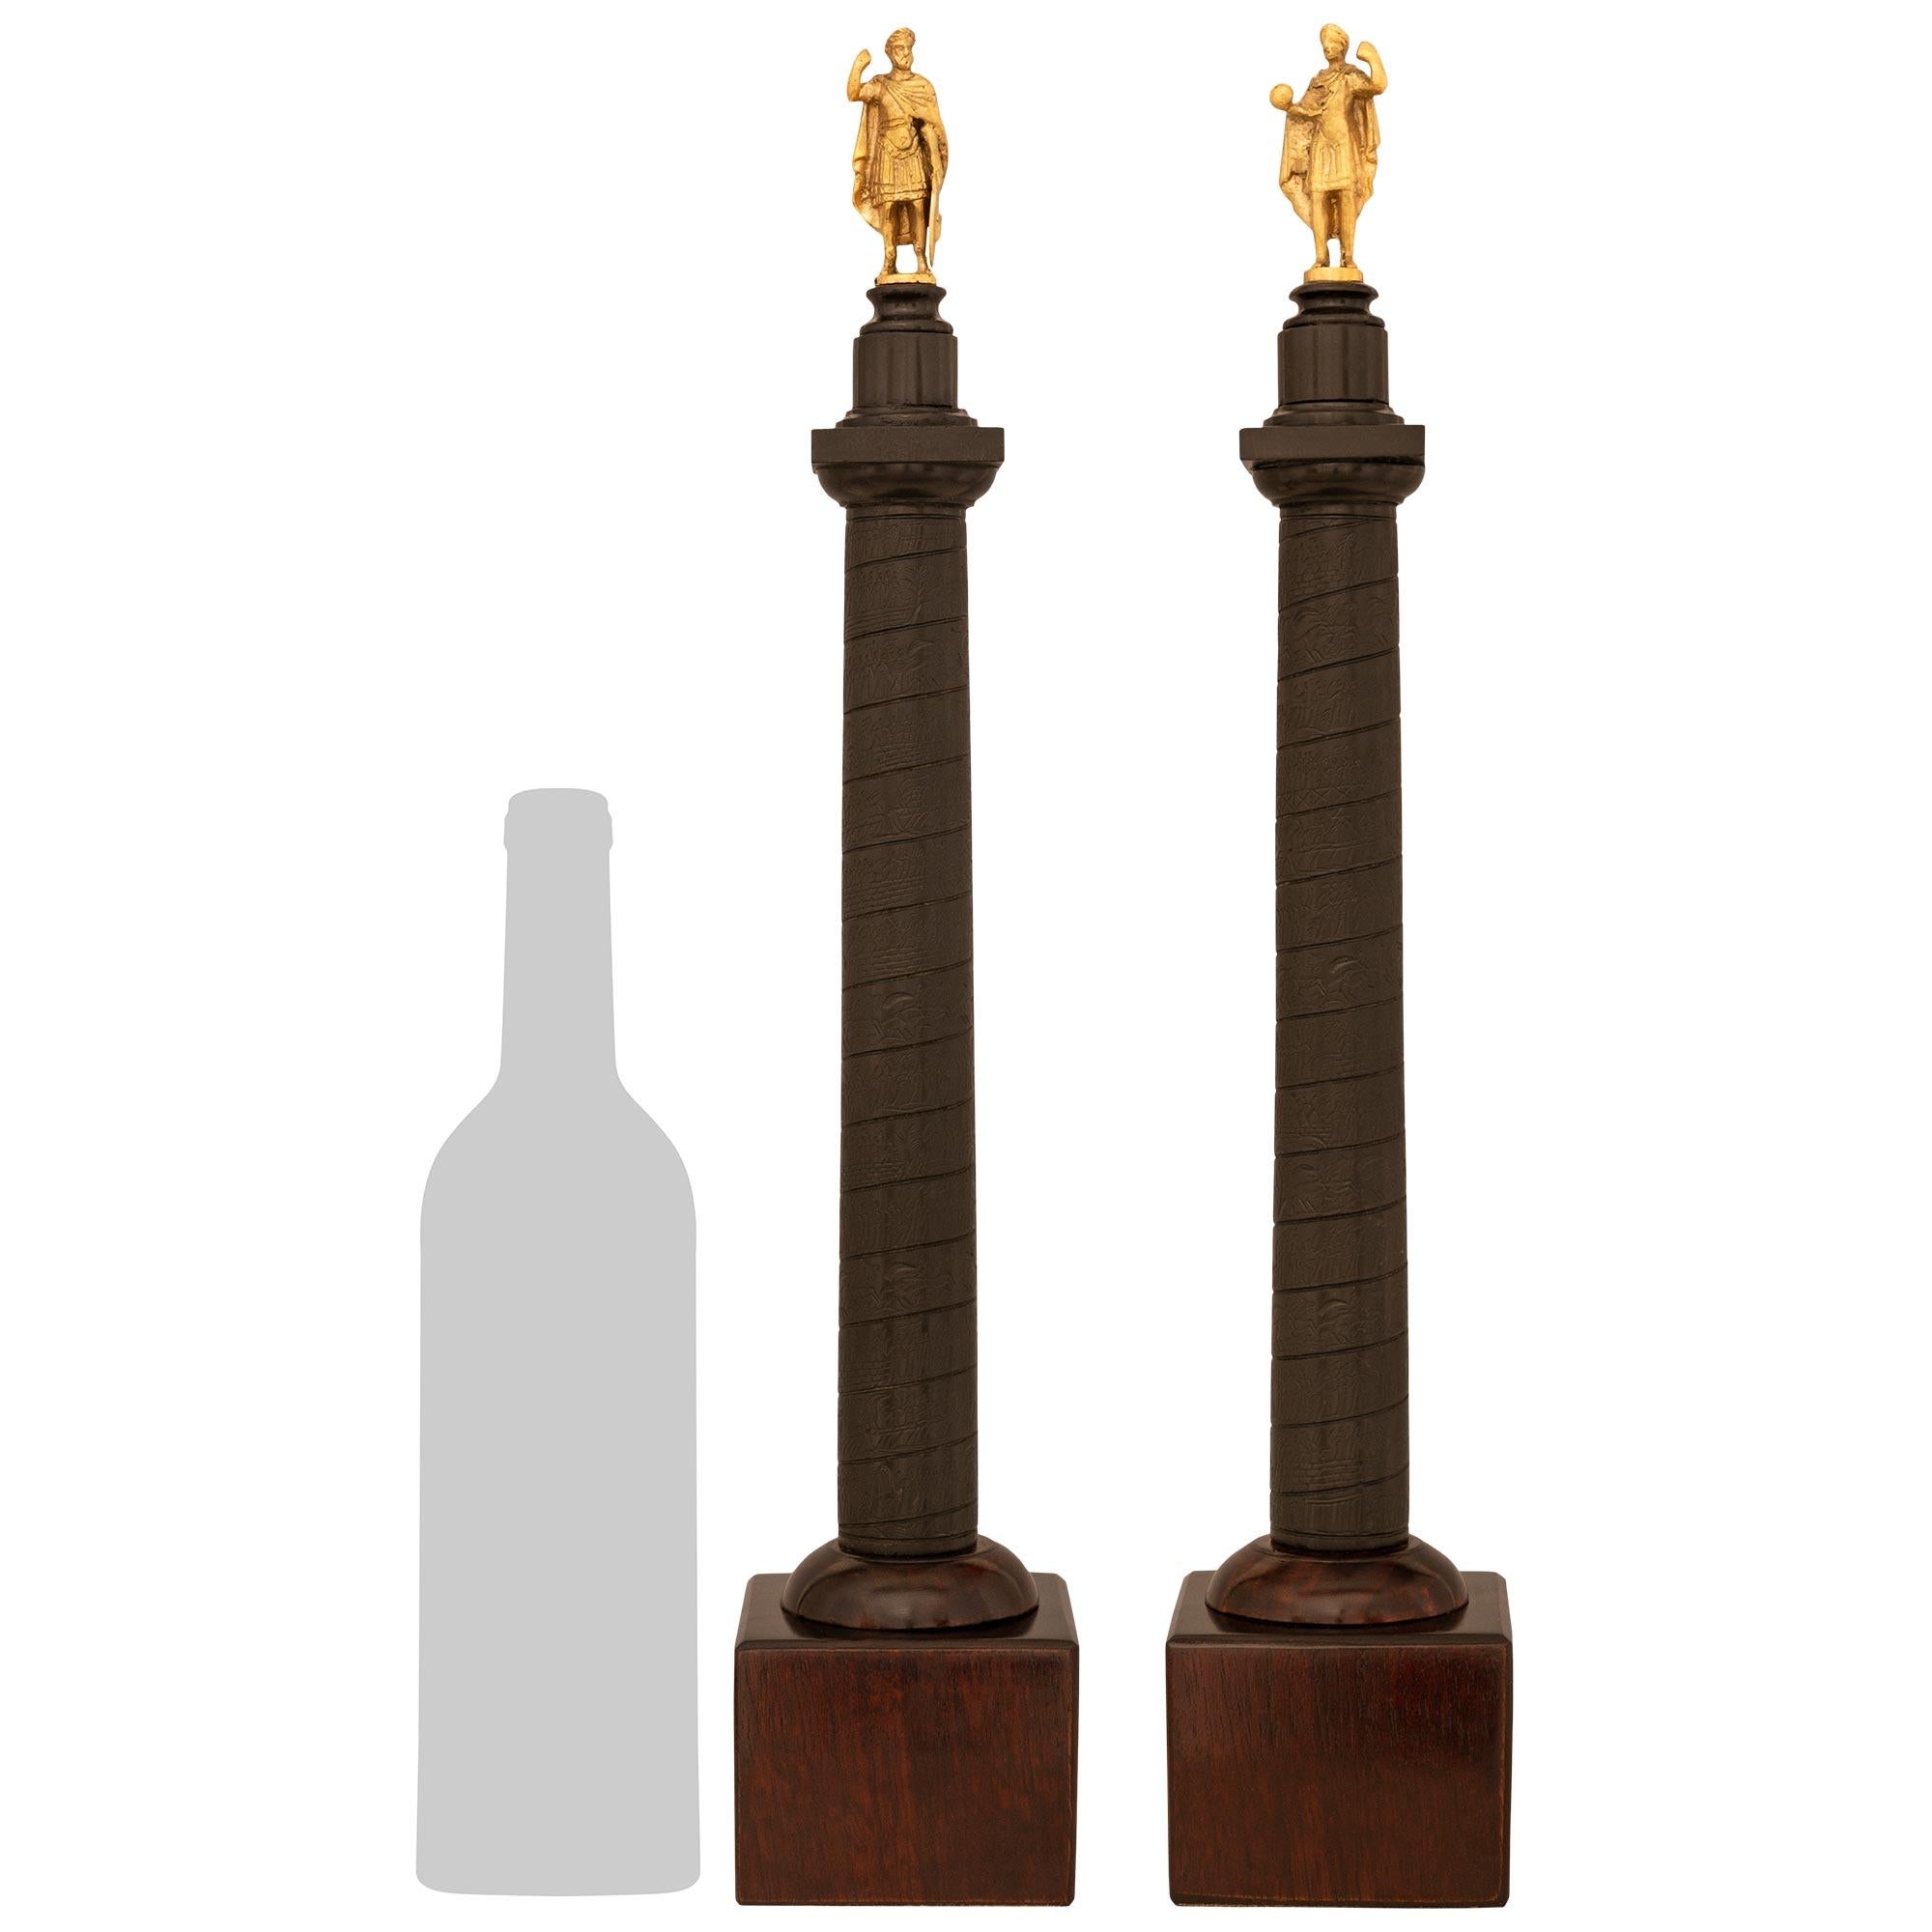 A handsome and finely detailed true pair of Italian 19th century Grand Tour period Ormolu, Mahogany, and patinated Bronze columns and statues. Each column is raised by a square Mahogany block base below the patinated Bronze column. Each patinated